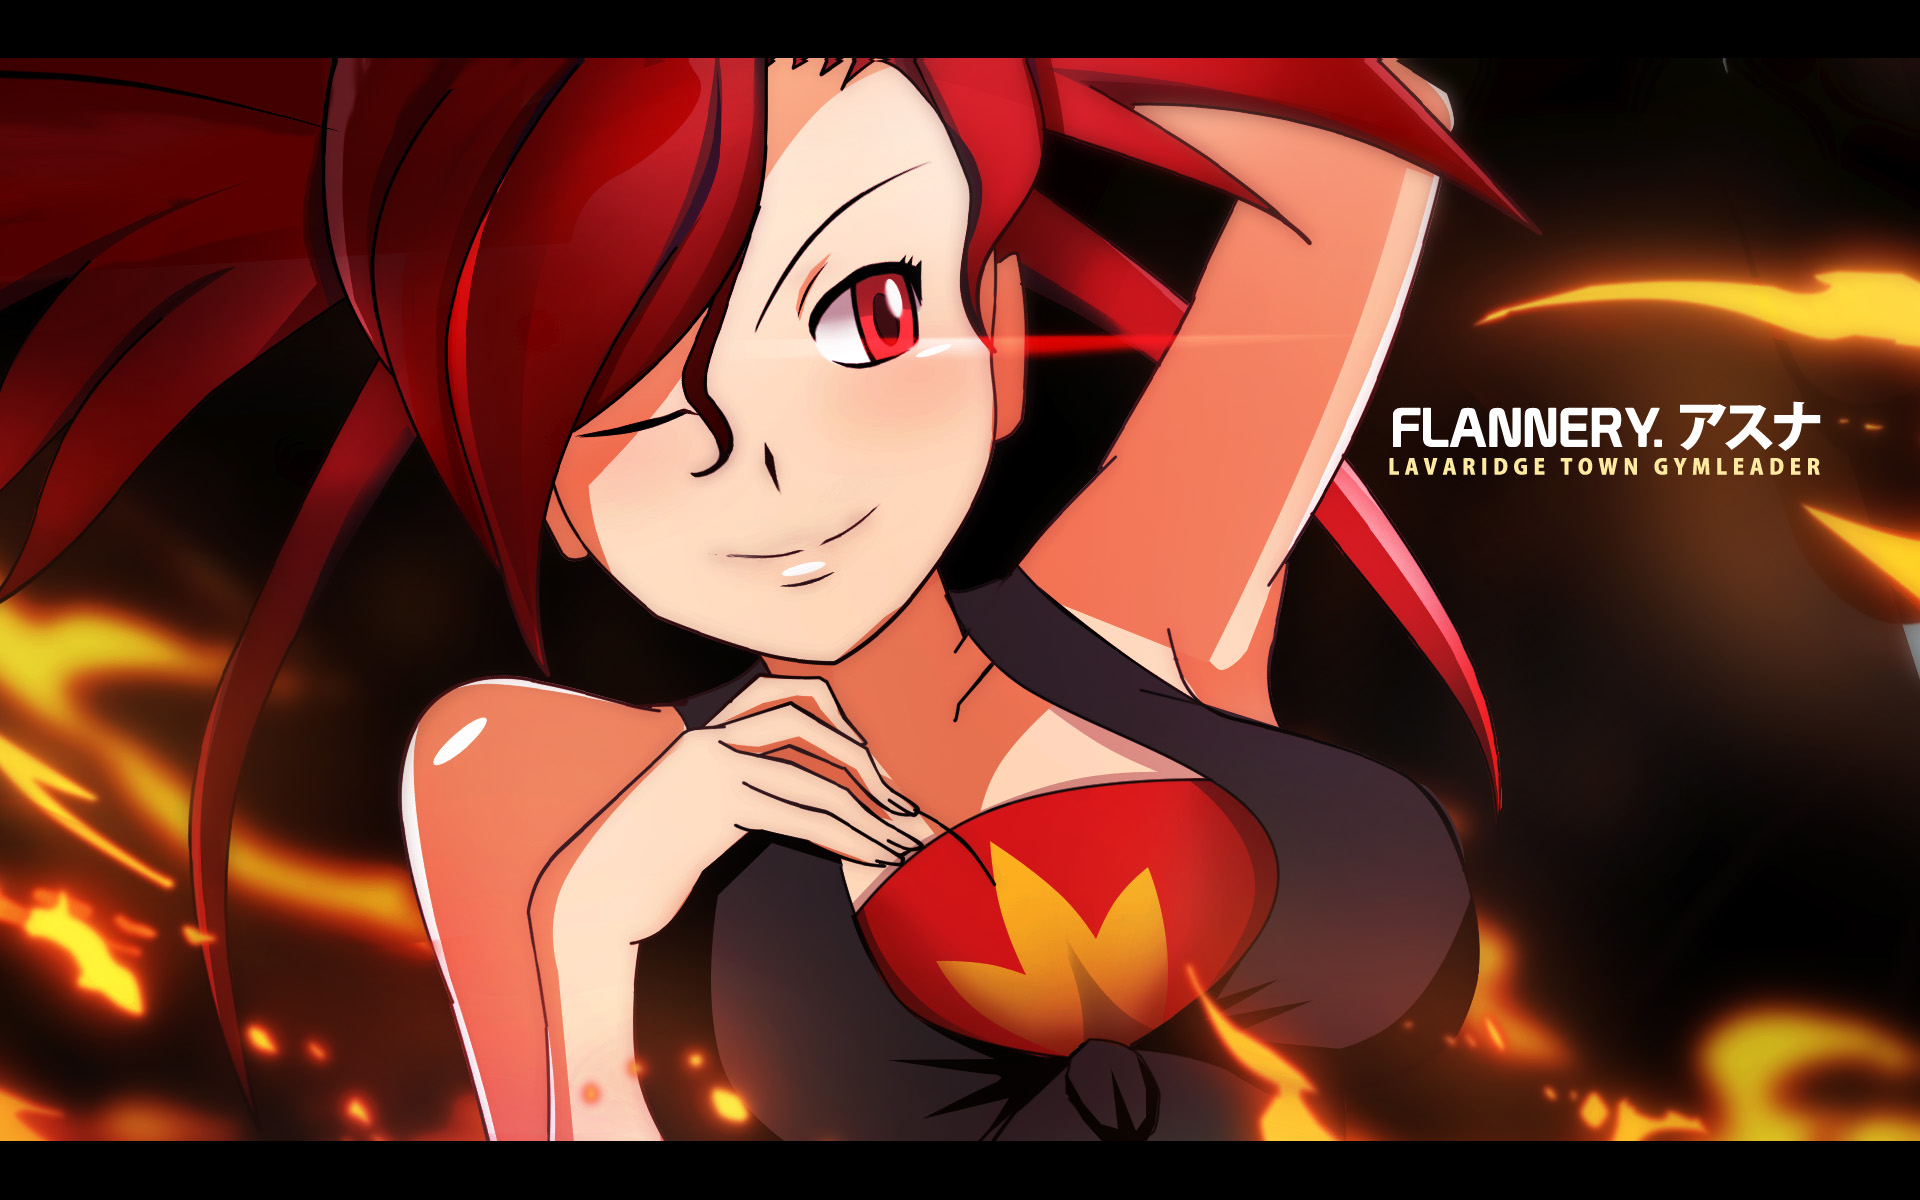 23) Flannery.